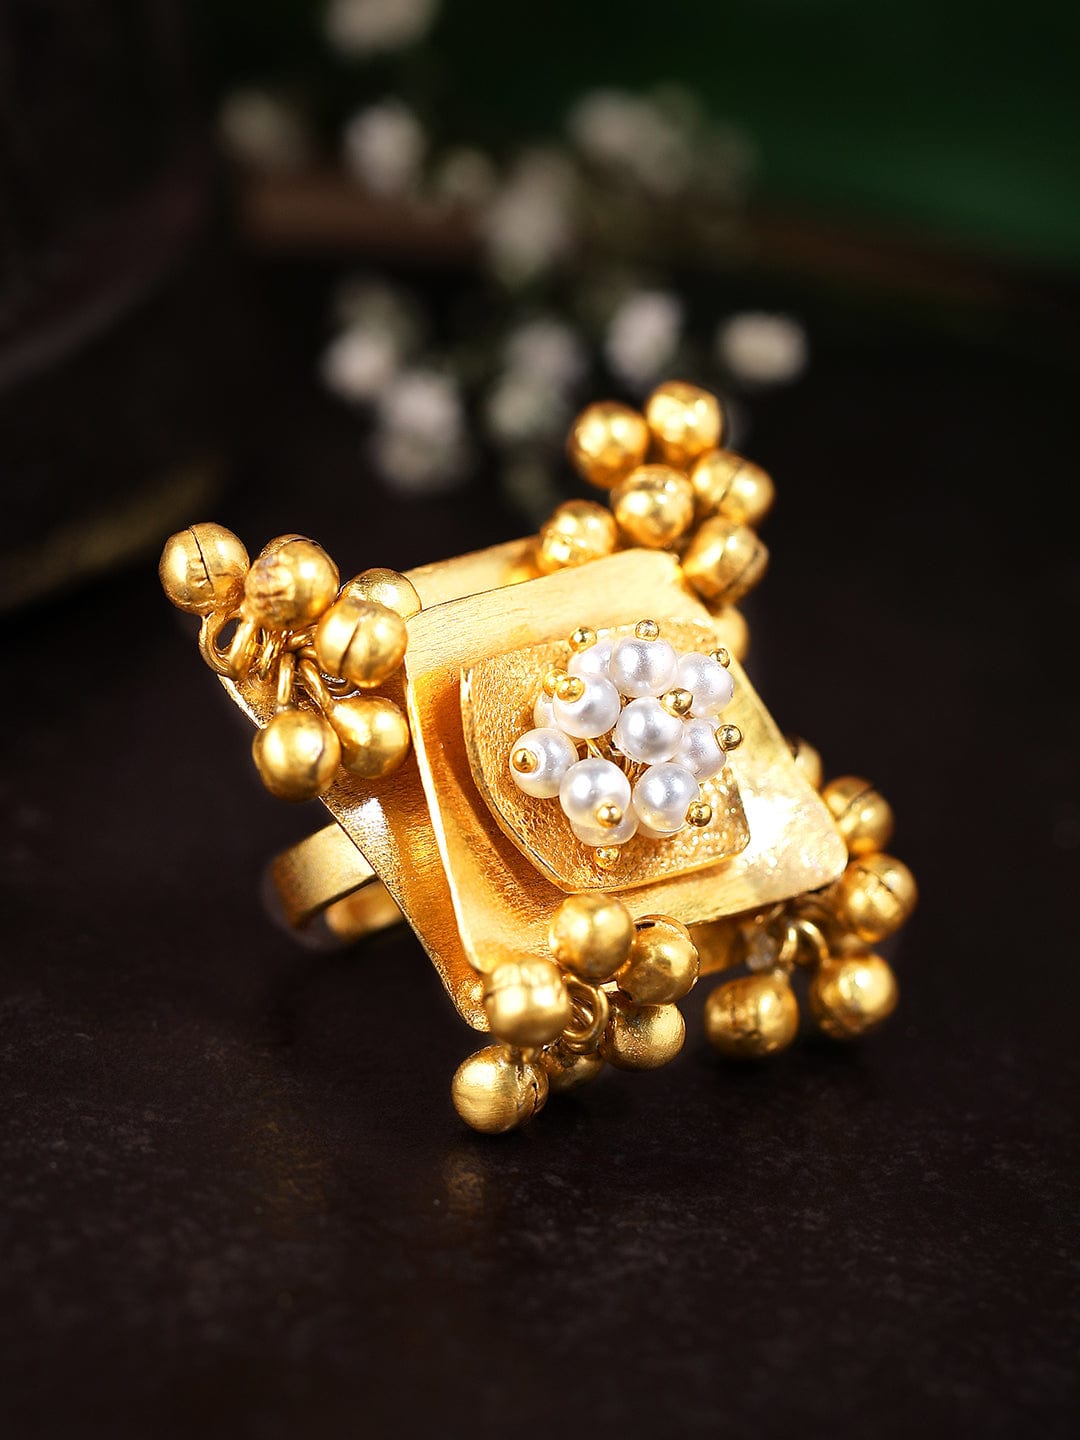 Rubans 24K Gold Plated Unique Ring With Pearls And Golden Beads Rings